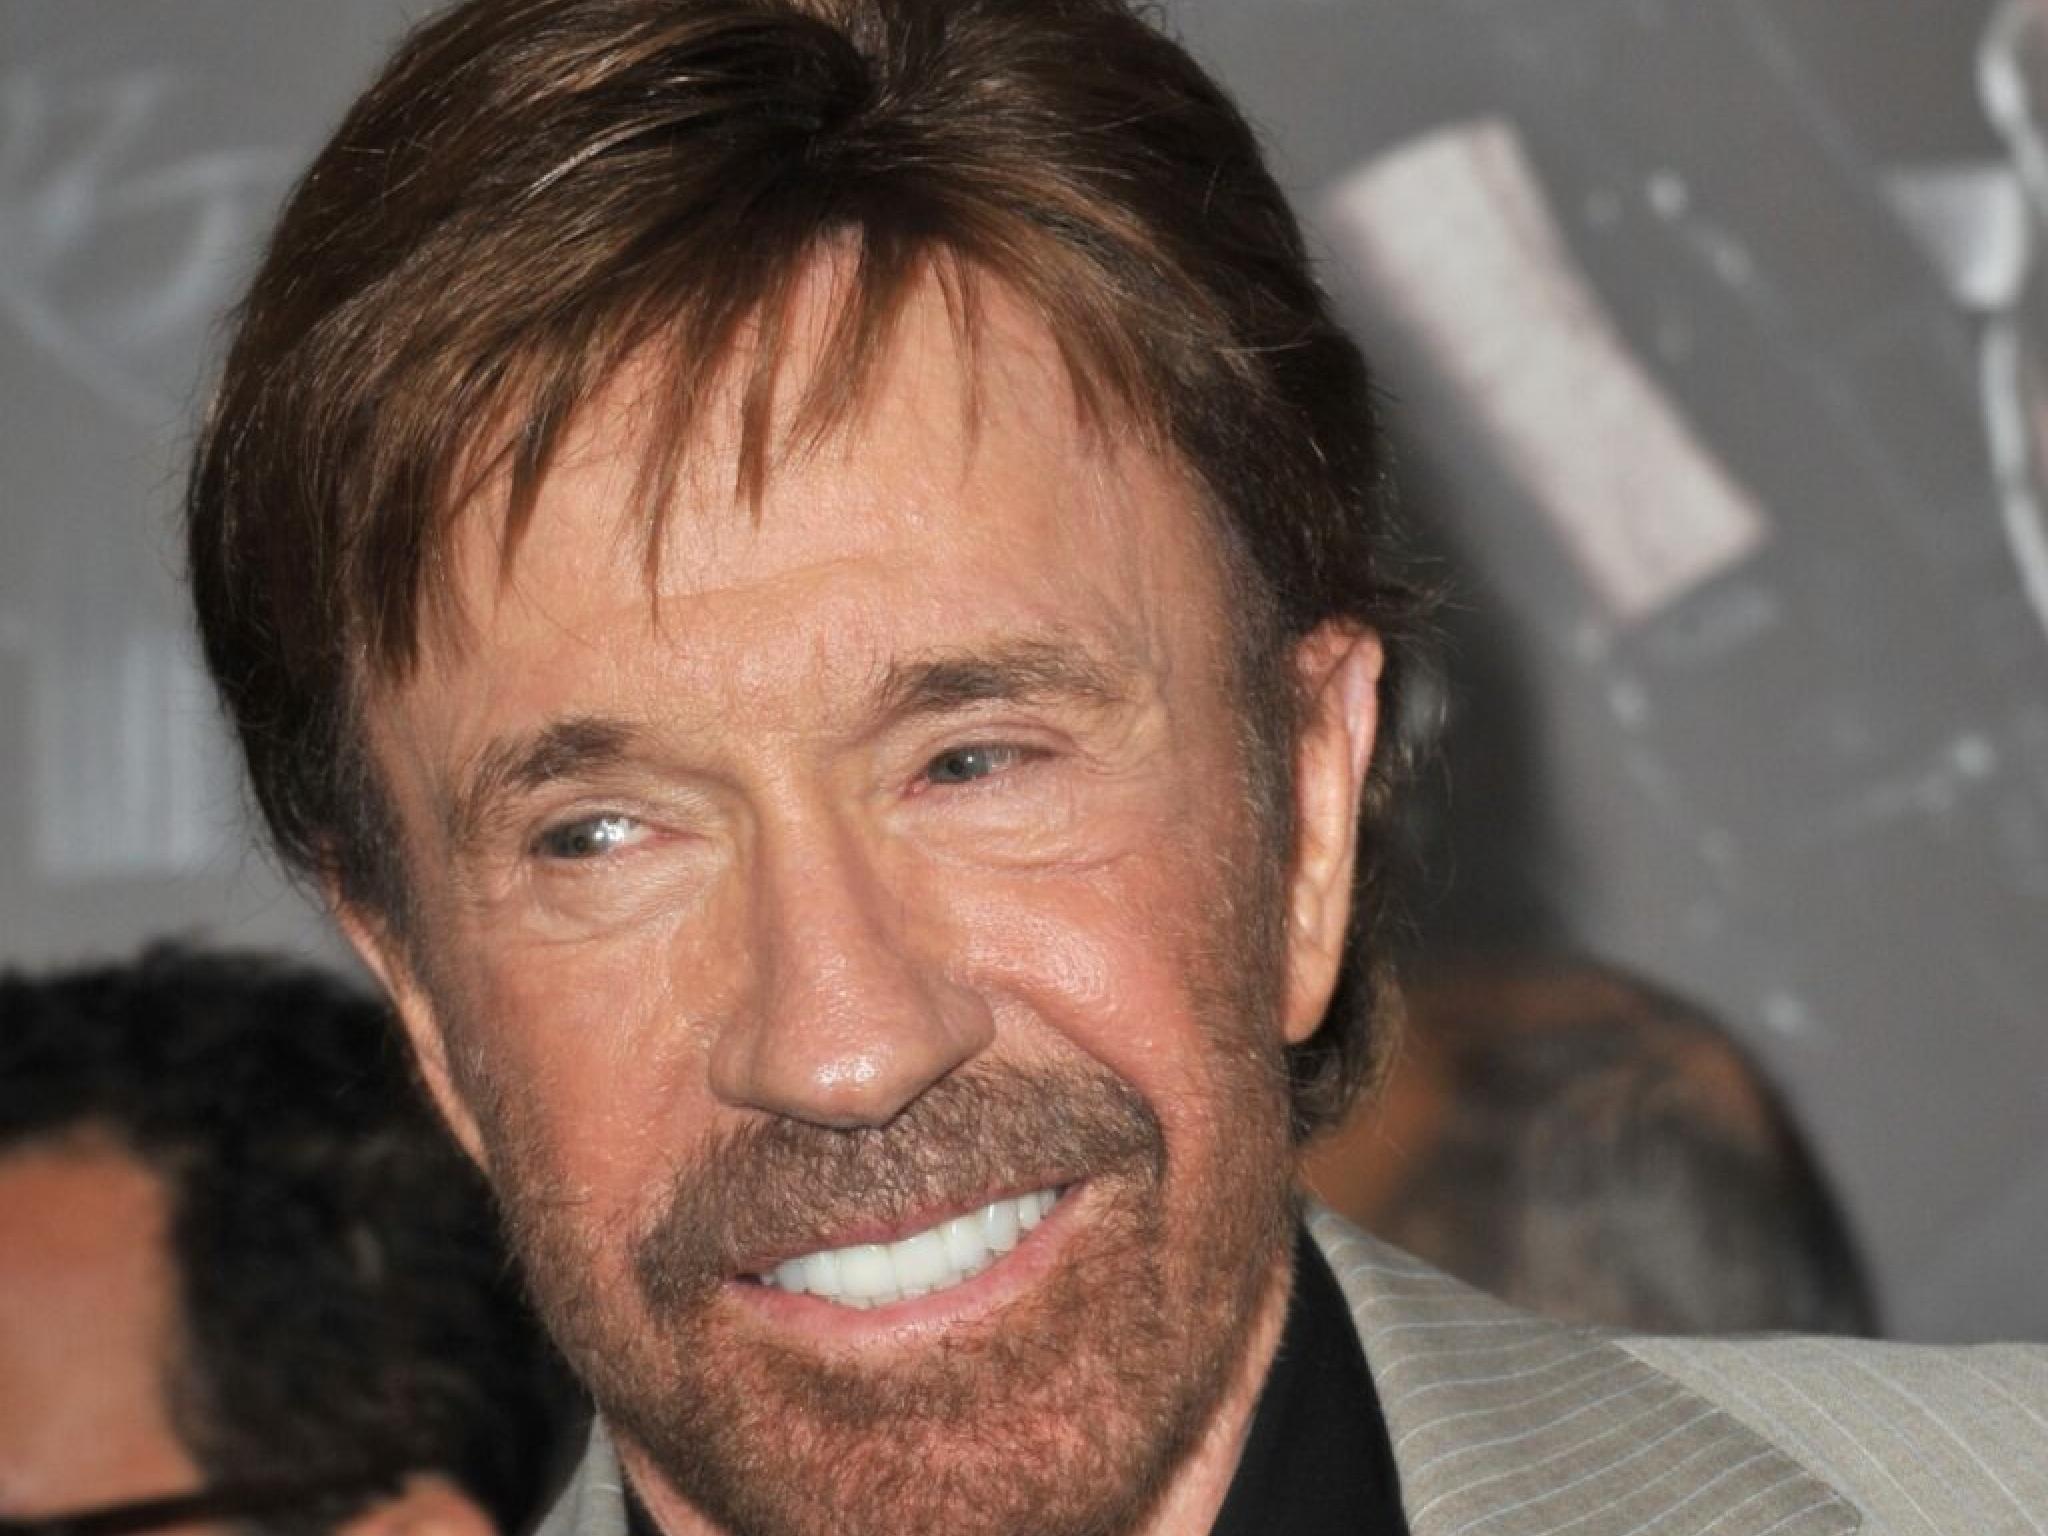  crypto-analyst-sees-chuck-norris-inspired-memecoin-surging-1200-if-it-pushes-past-this-next-resistance-level 